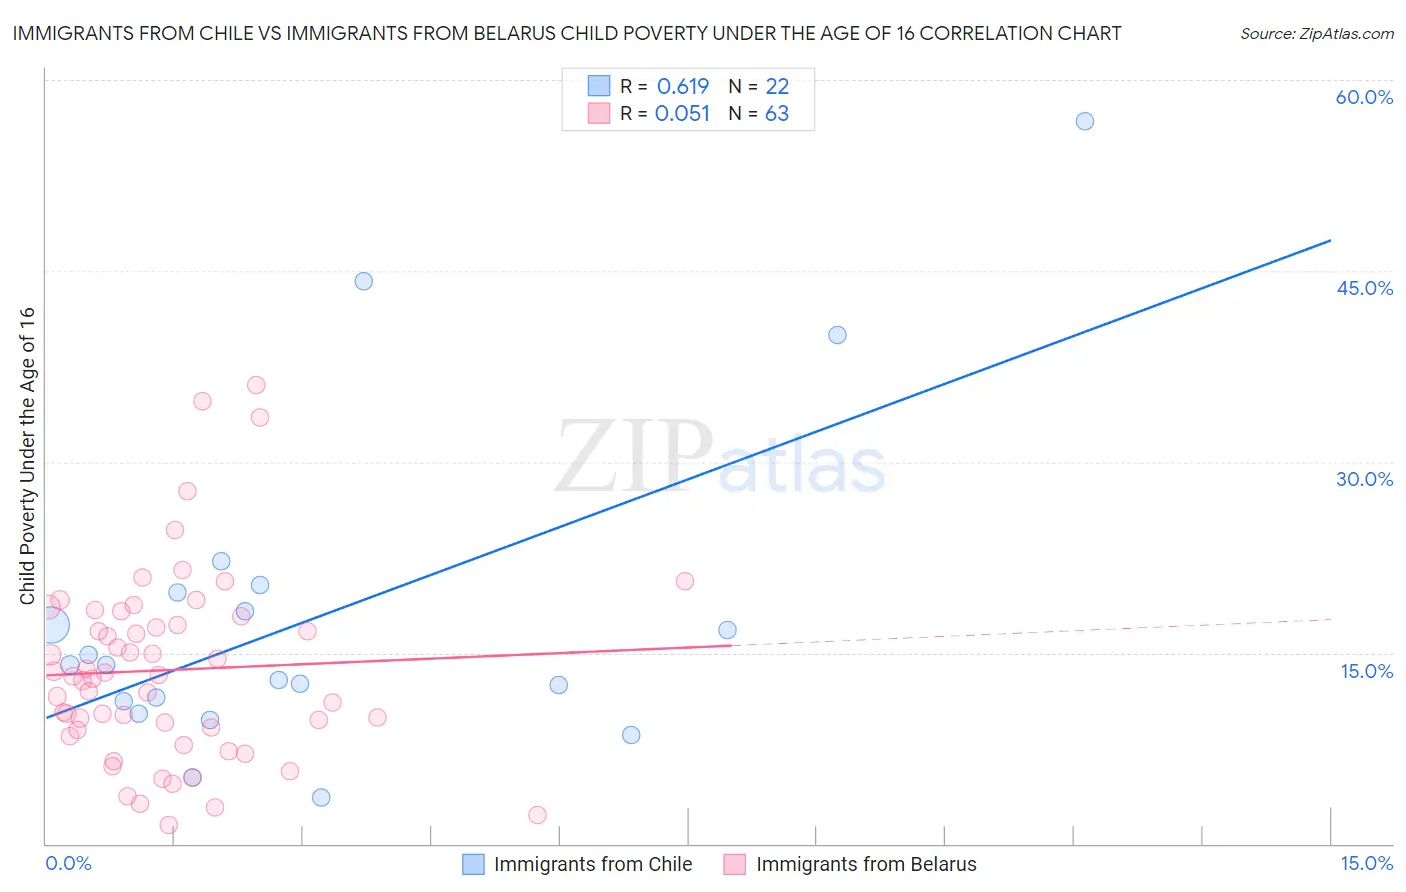 Immigrants from Chile vs Immigrants from Belarus Child Poverty Under the Age of 16